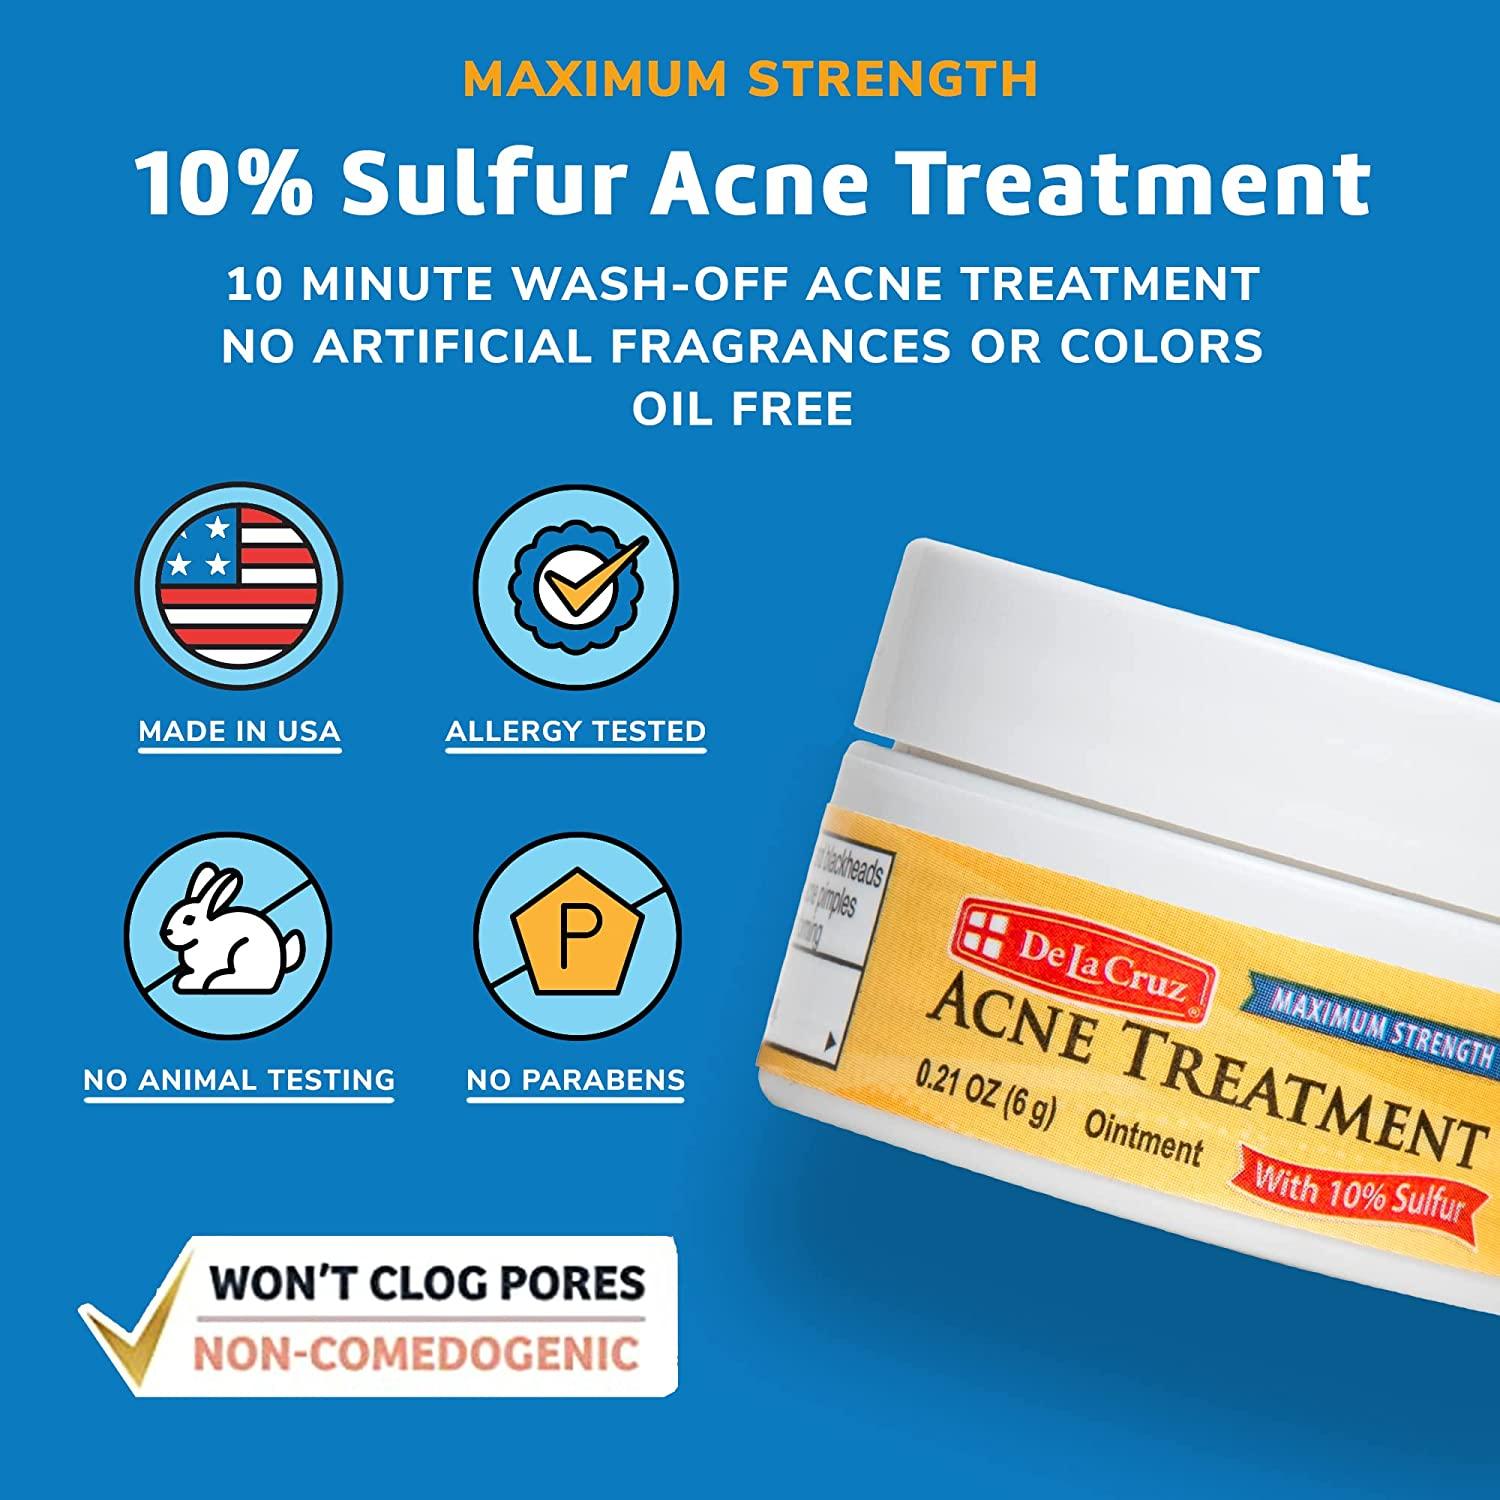 De La Cruz 10% Sulfur Ointment Acne Treatment - Medication to Clear Cystic  Acne Pimples and Blackheads on Face and Body - Made in USA - 2.6 oz